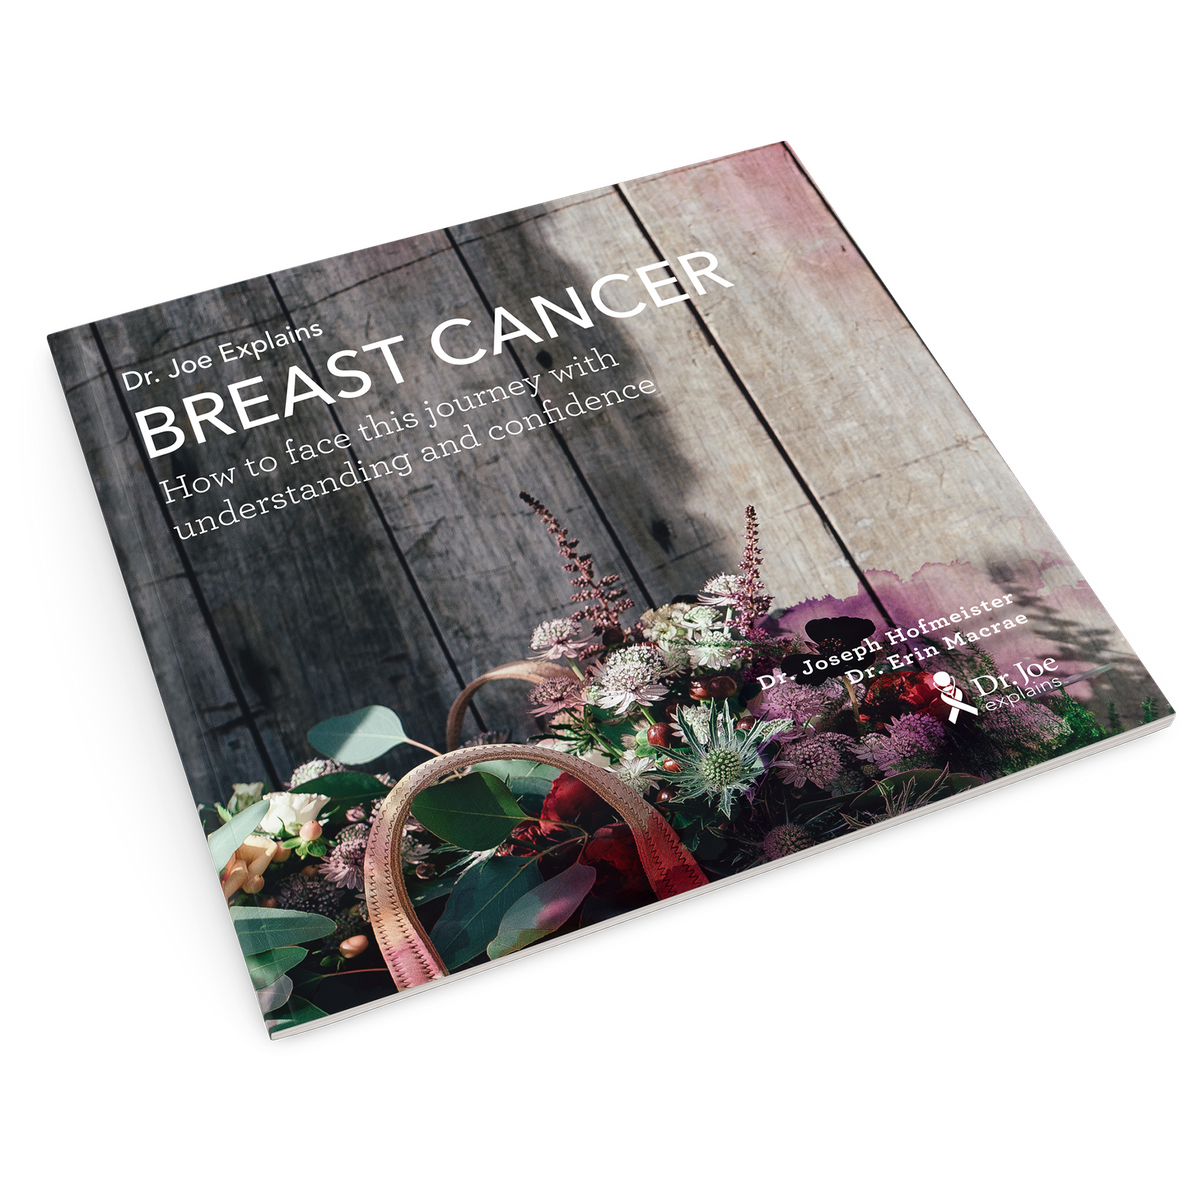 breast cancer overview booklet patient education resource